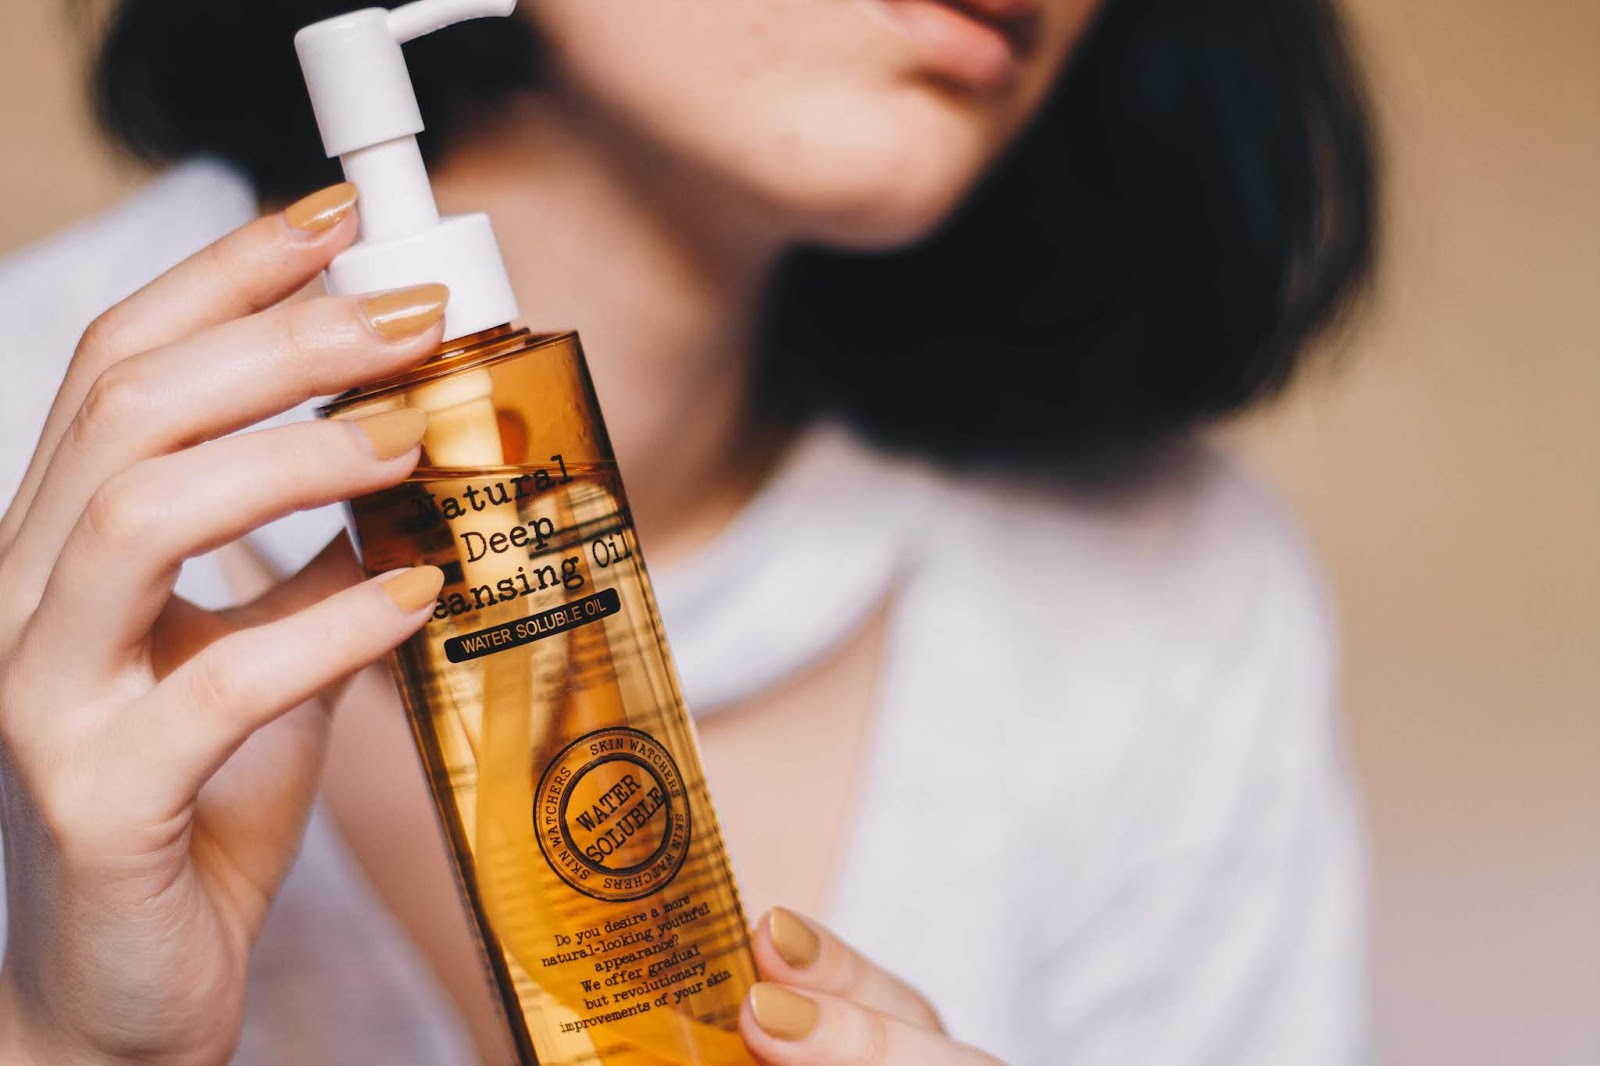 "Skin Watchers Natural Deep Cleansing Oil is a natural cleansing oil that is formulated with Natural Apricot Oil, Macadamia Seed Oil, Meadowfoam Seed Oil, and Bergamot Oil. "